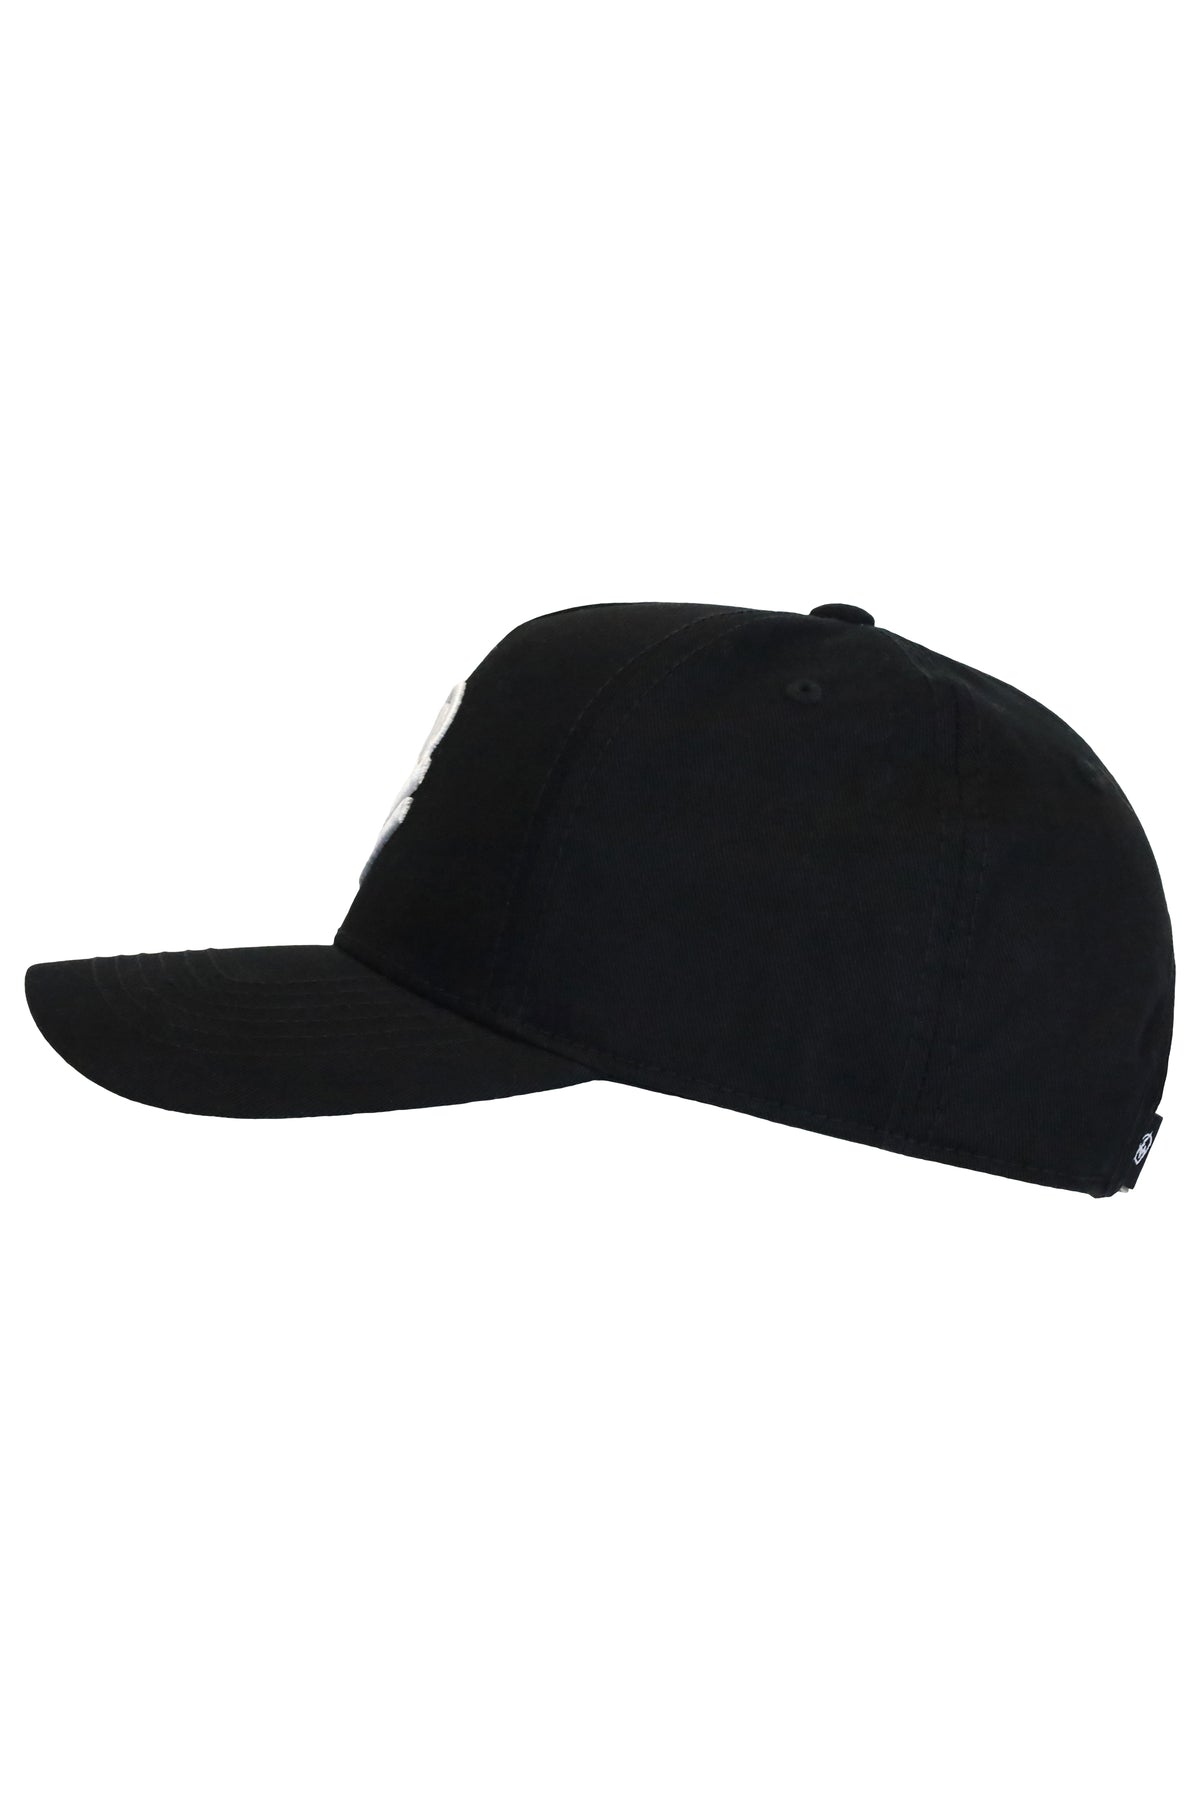 ROSEWING SNAPBACK HAT